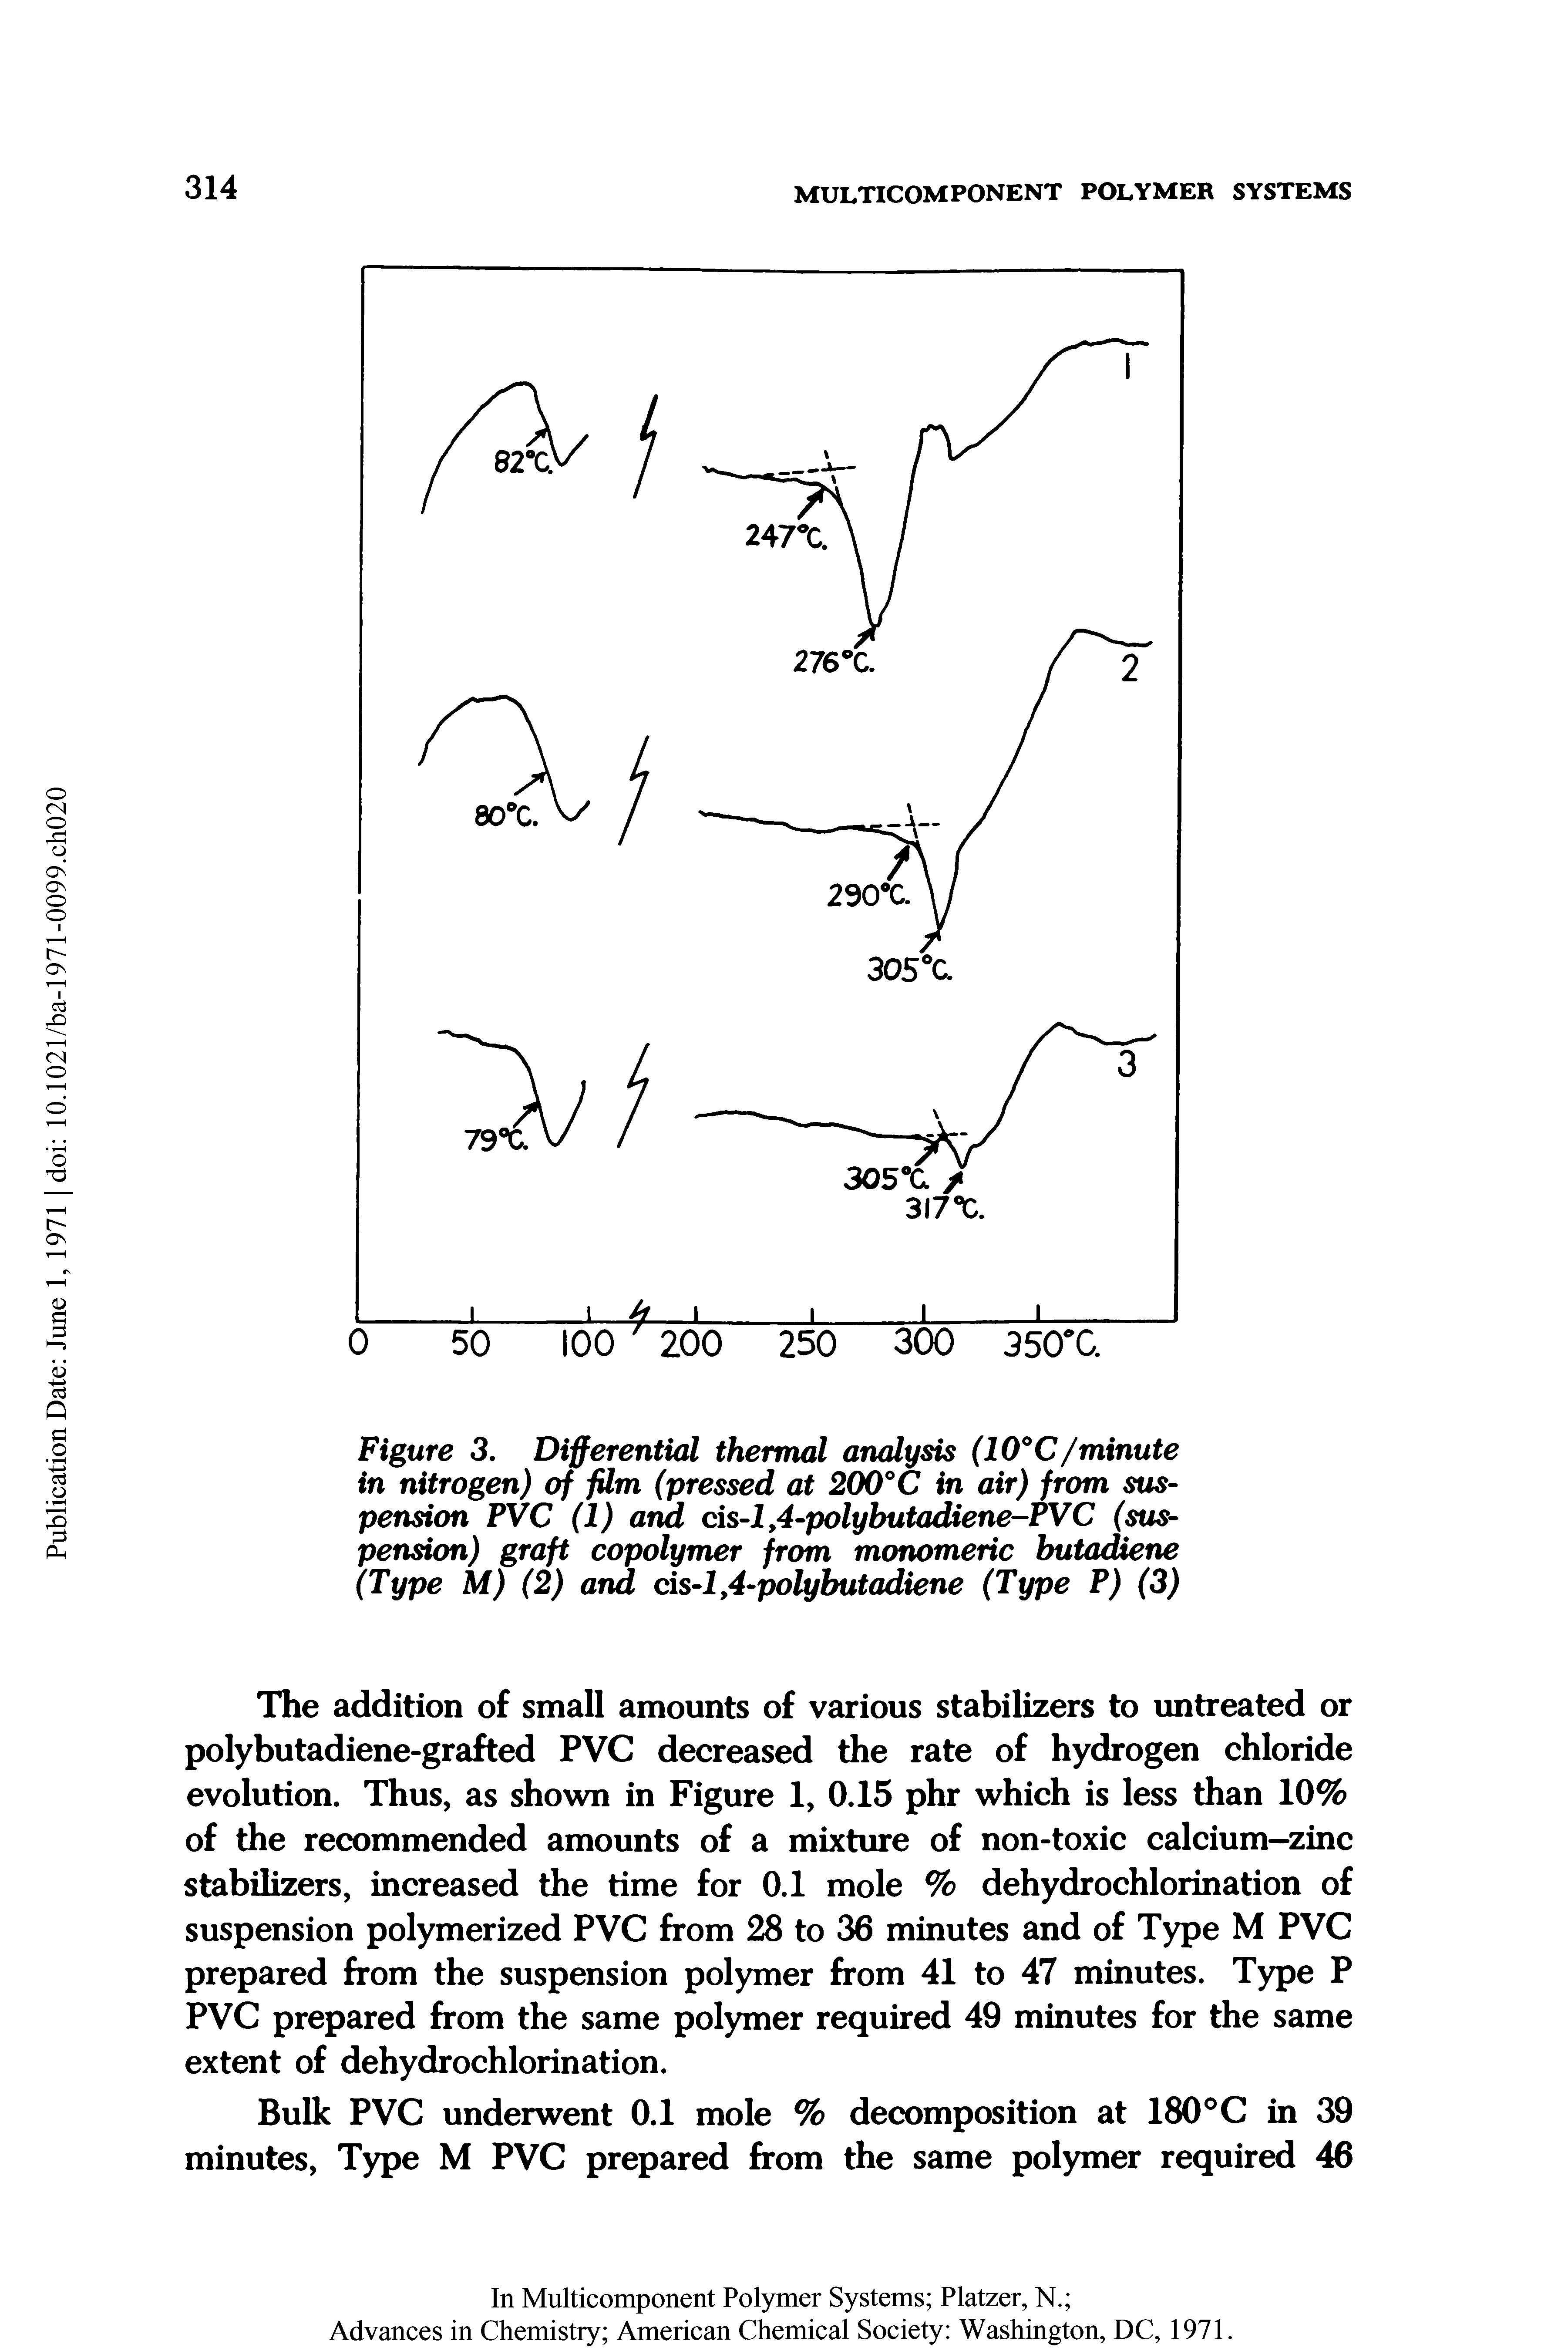 Figure 3. Differential thermal analysis (10°C/minute in nitrogen) of film (pressed at 200°C in air) from suspension PVC (1) and cis-l,4-polybutadiene-PVC (suspension) graft copolymer from monomeric butadiene (Type M) (2) and cis-1,4-polybutadiene (Type P) (3)...